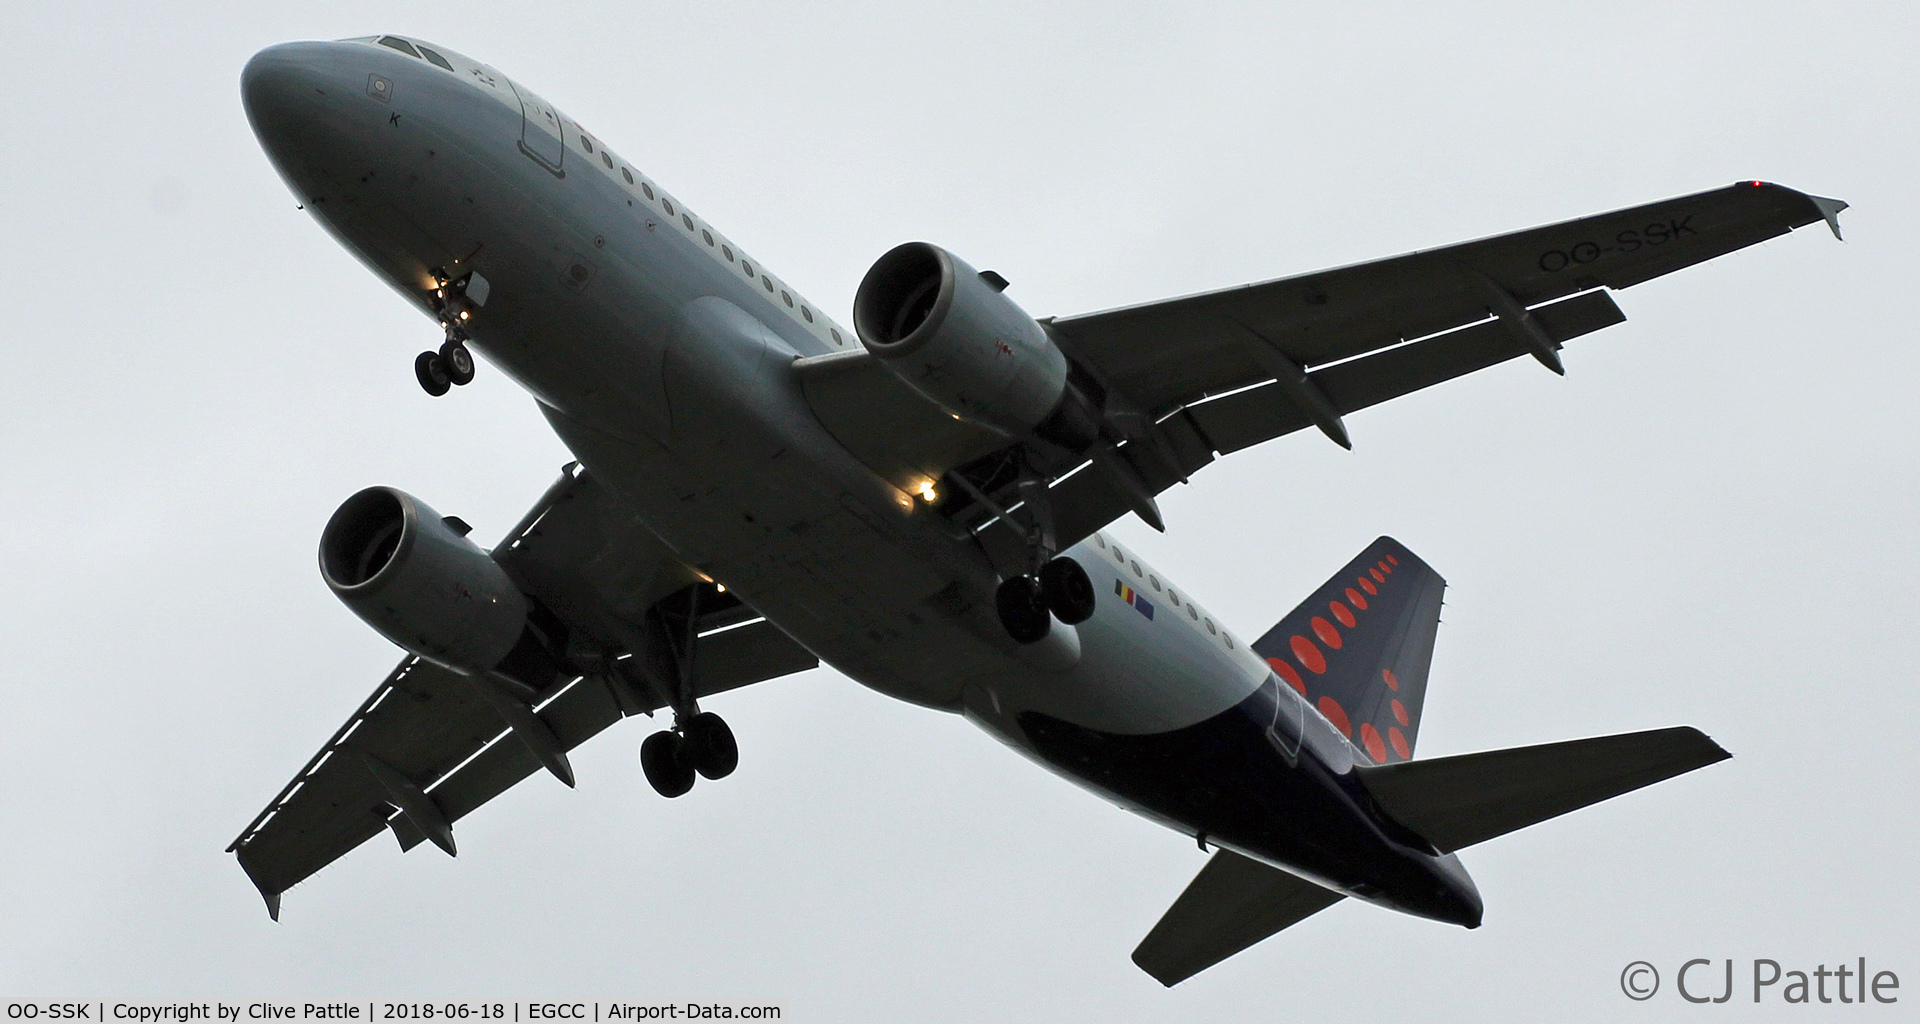 OO-SSK, 2000 Airbus A319-112 C/N 1336, Late evening landing at Manchester EGCC